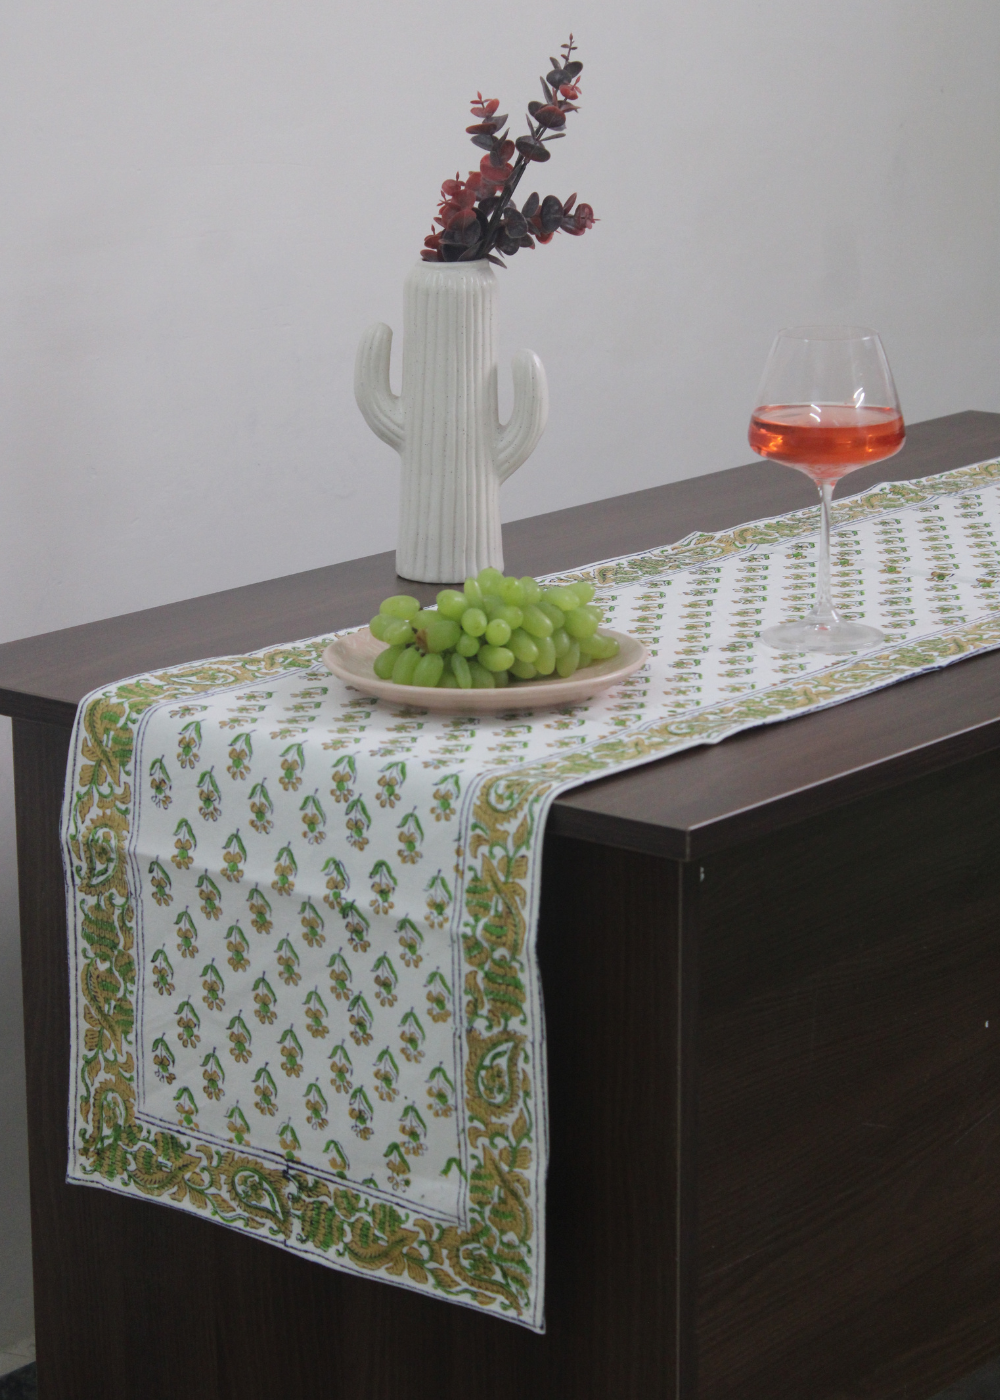 Green motif table runner with fruits